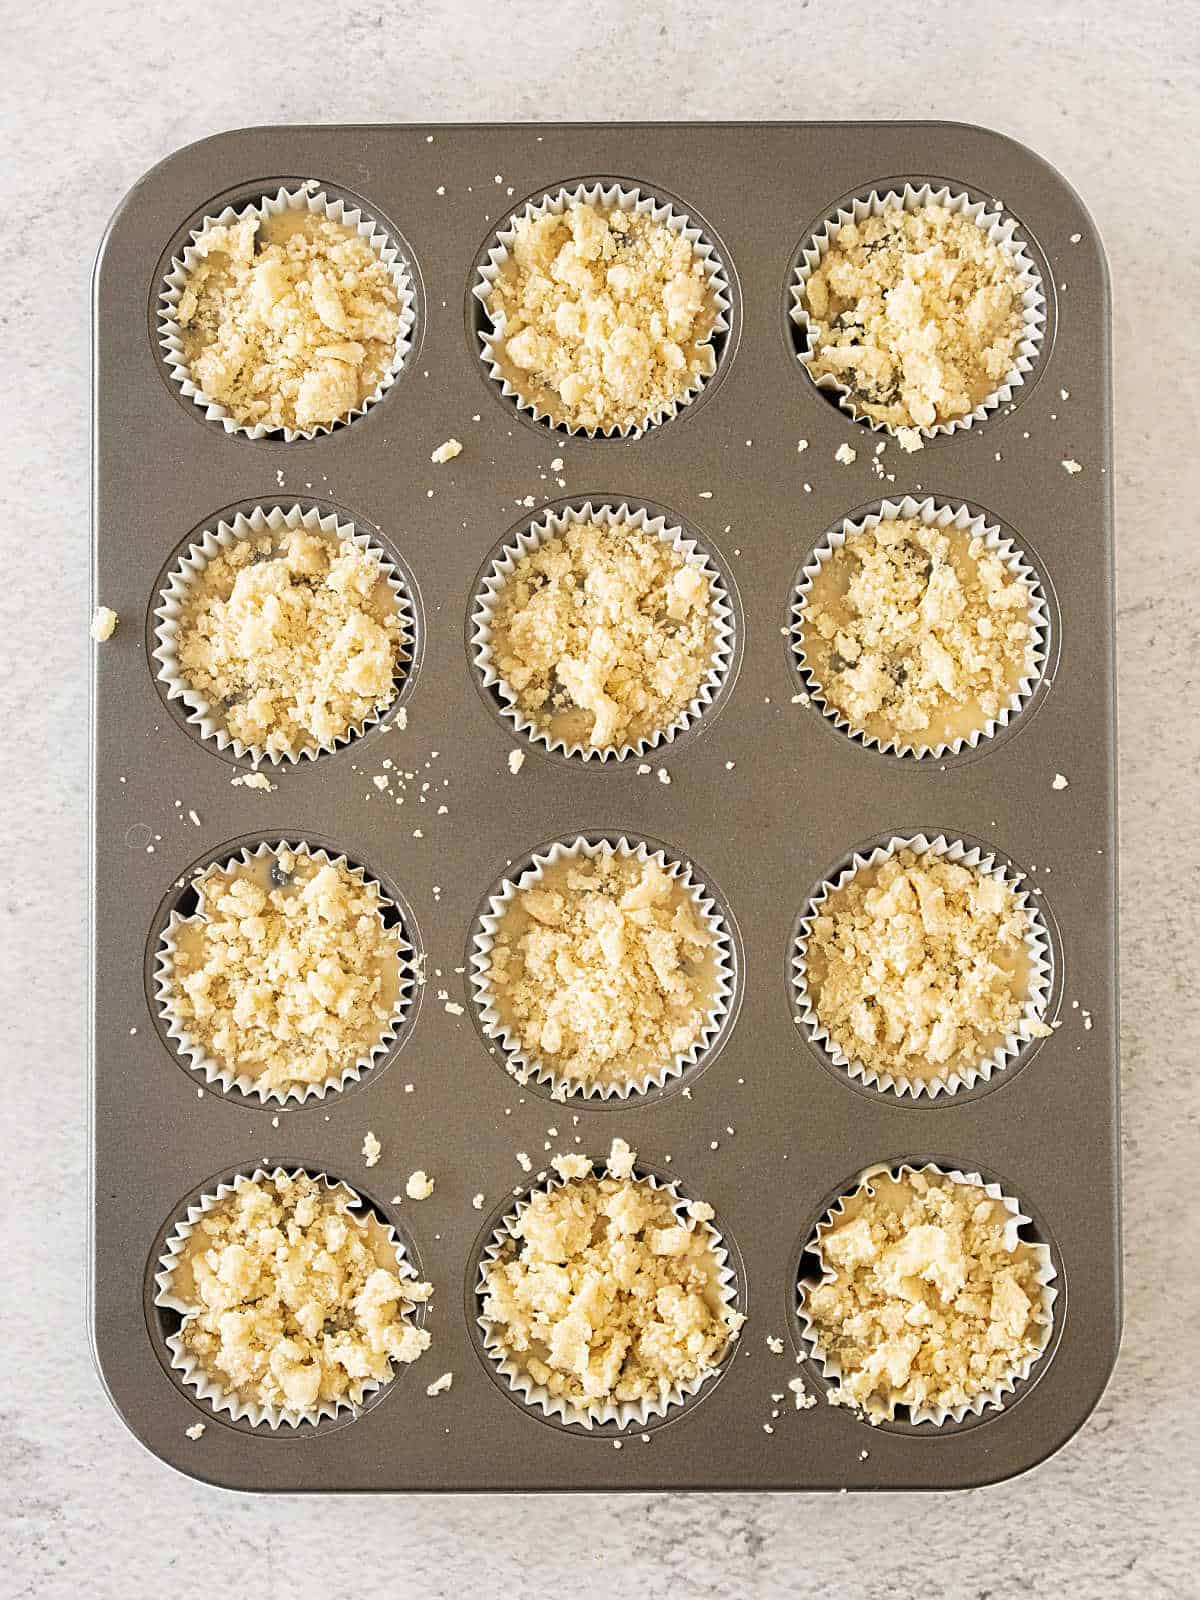 Crumble-topped muffins on the pan before baking. Light grey surface.